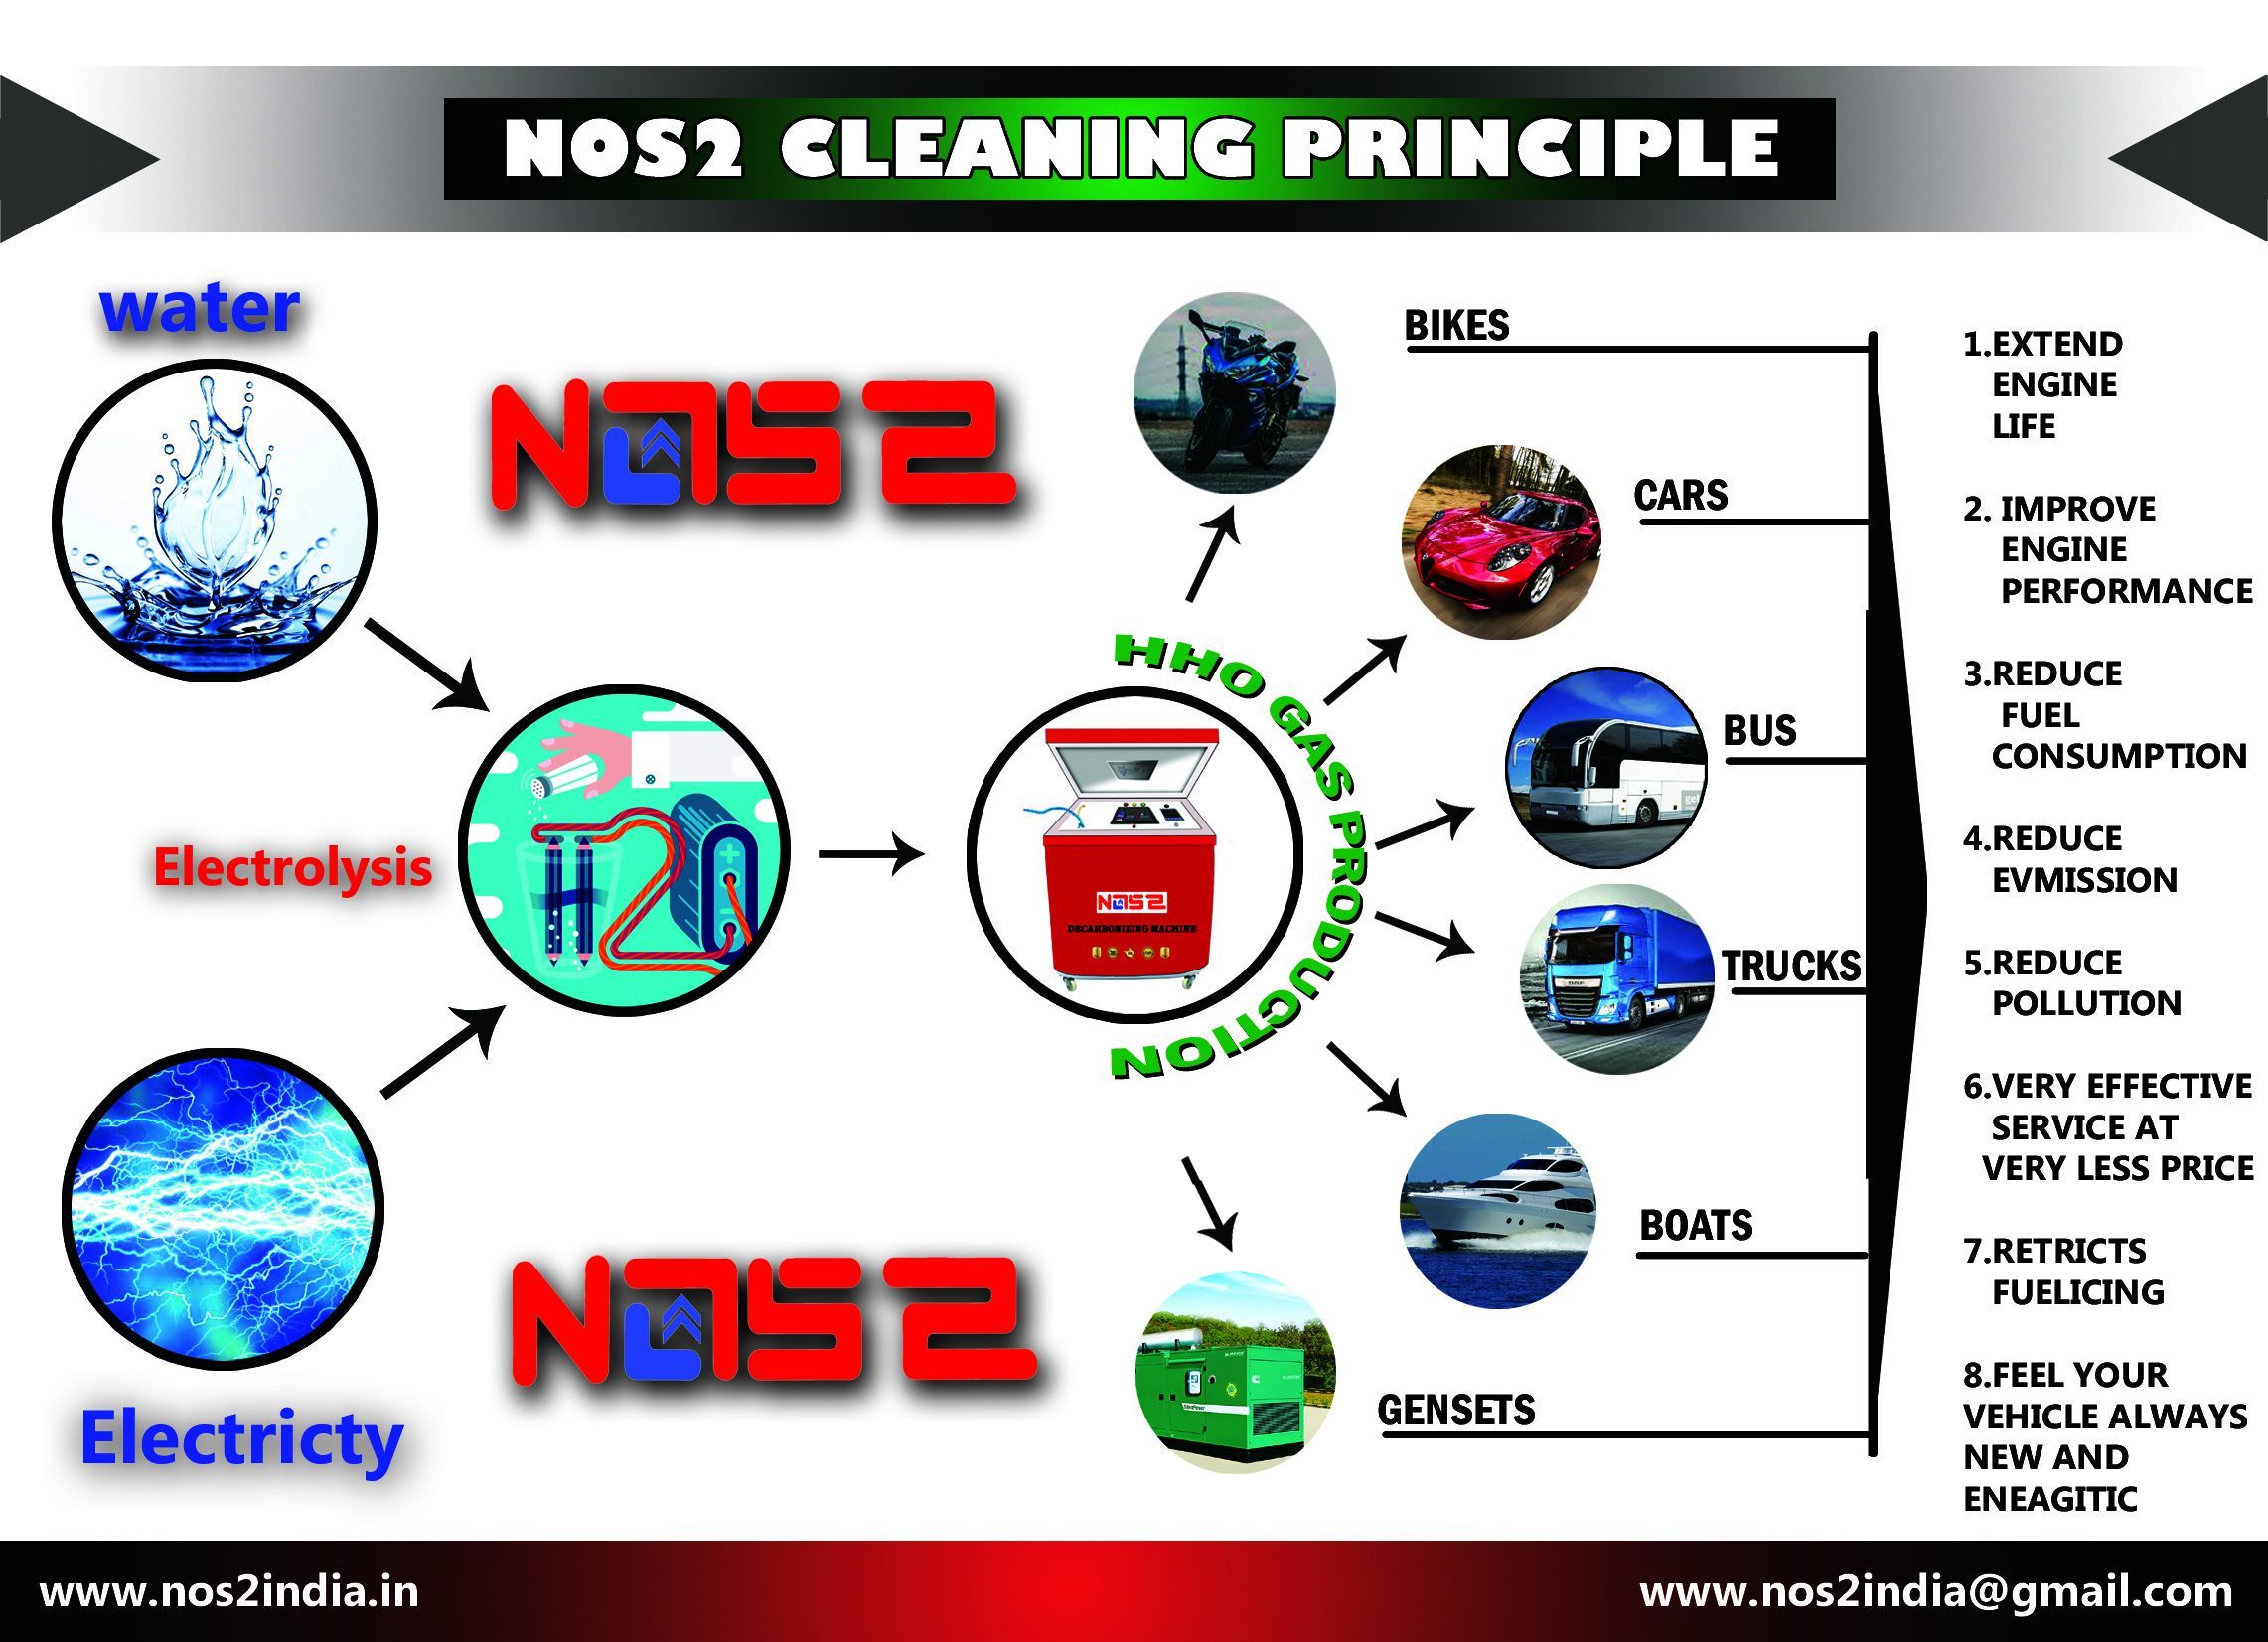 Vehicle Carbon Cleaner Machines